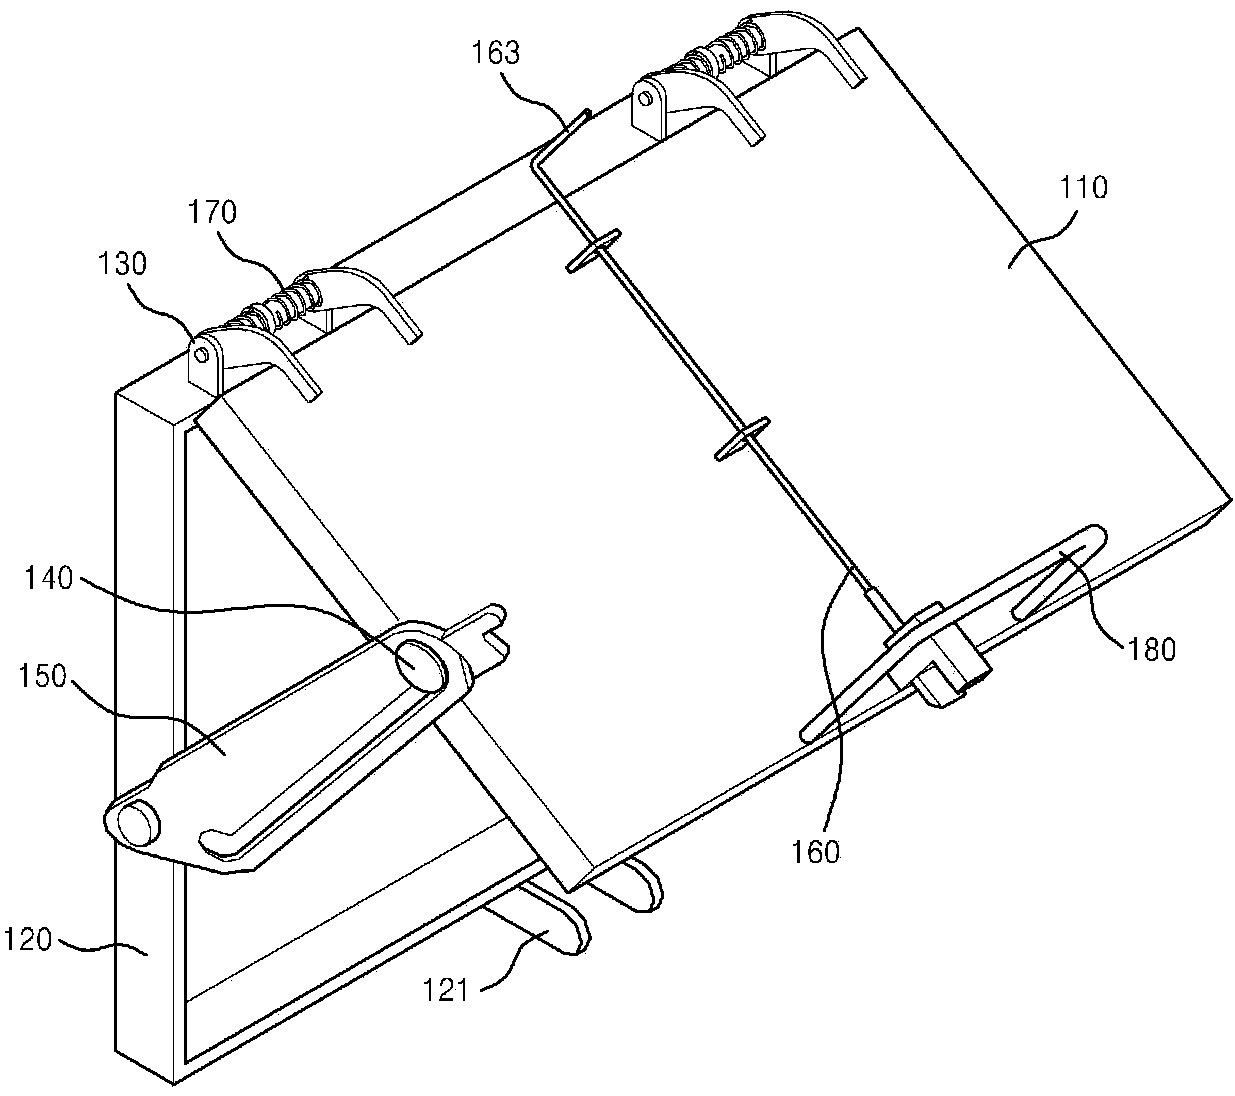 Hatch cover apparatus for vessel